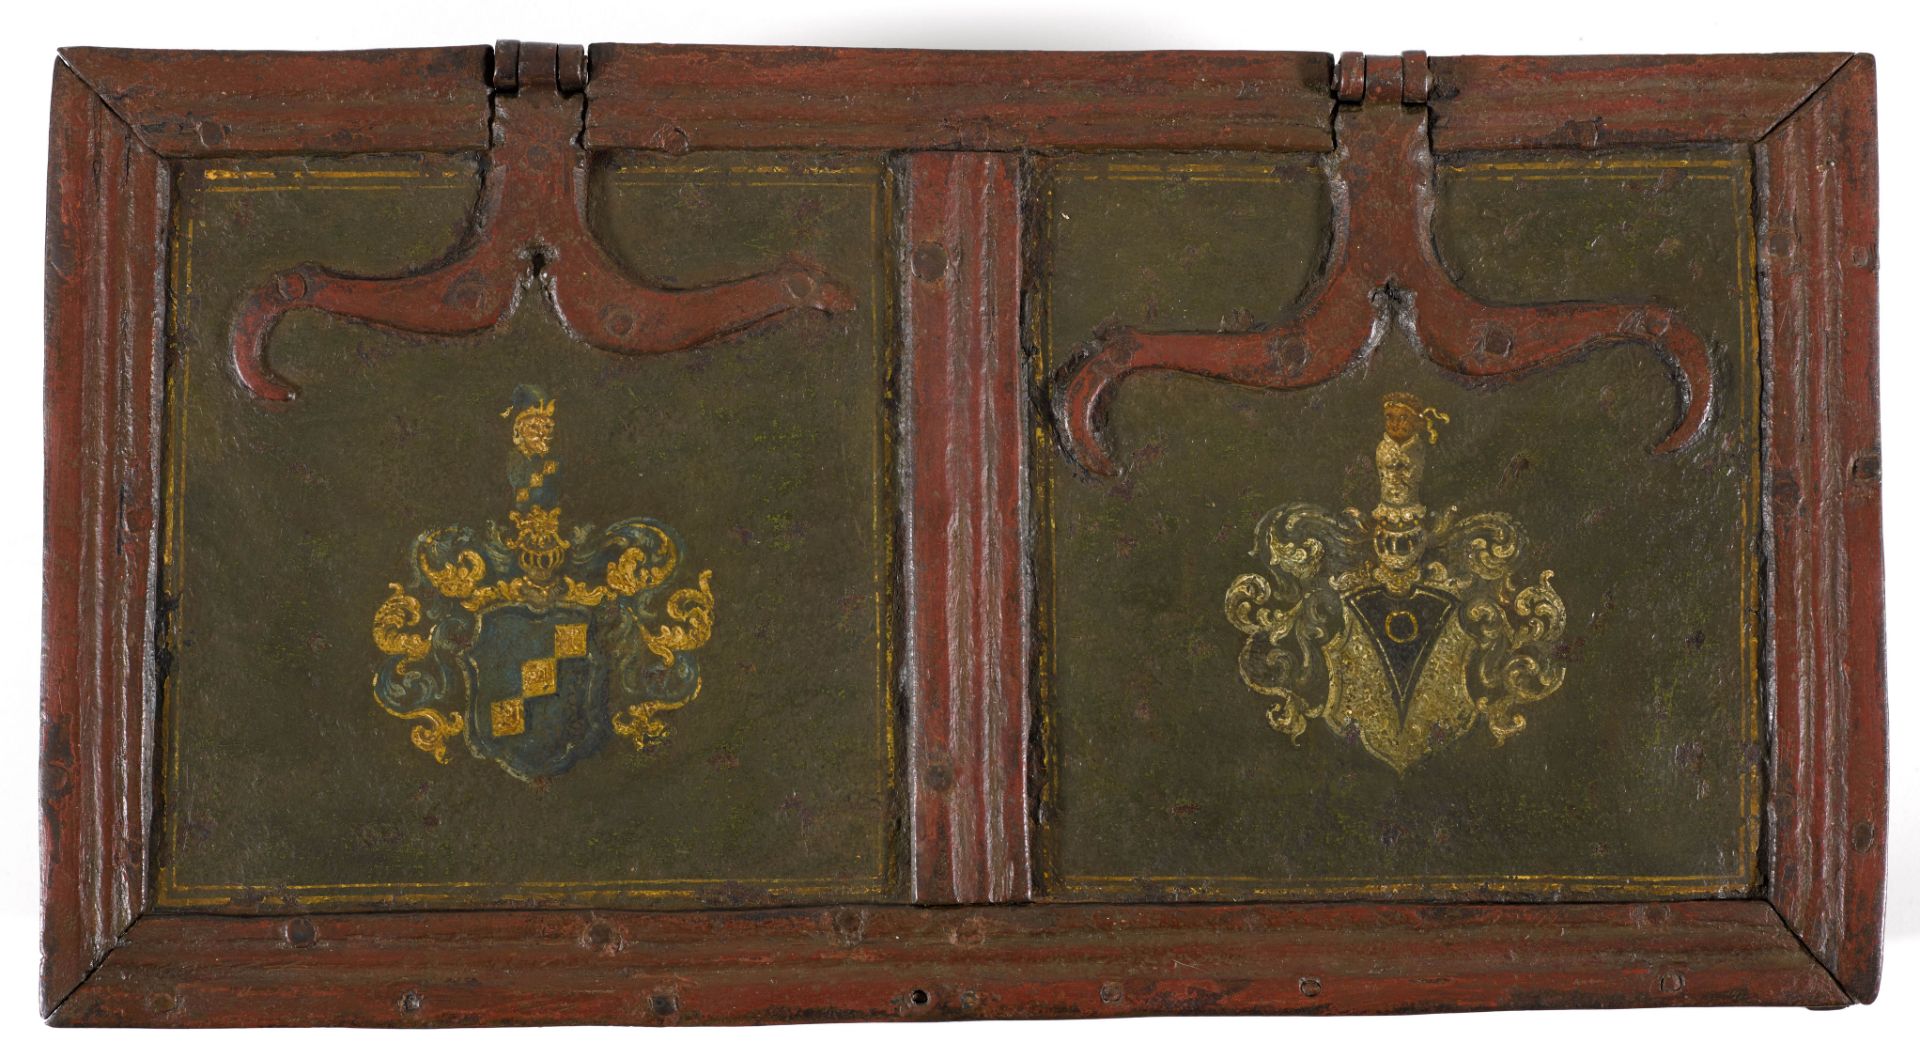 IRON CASKET BEARING THE COATS OF ARMS OF THE "PEYER" AND "VON WALDKIRCH" FAMILIES - Image 5 of 5